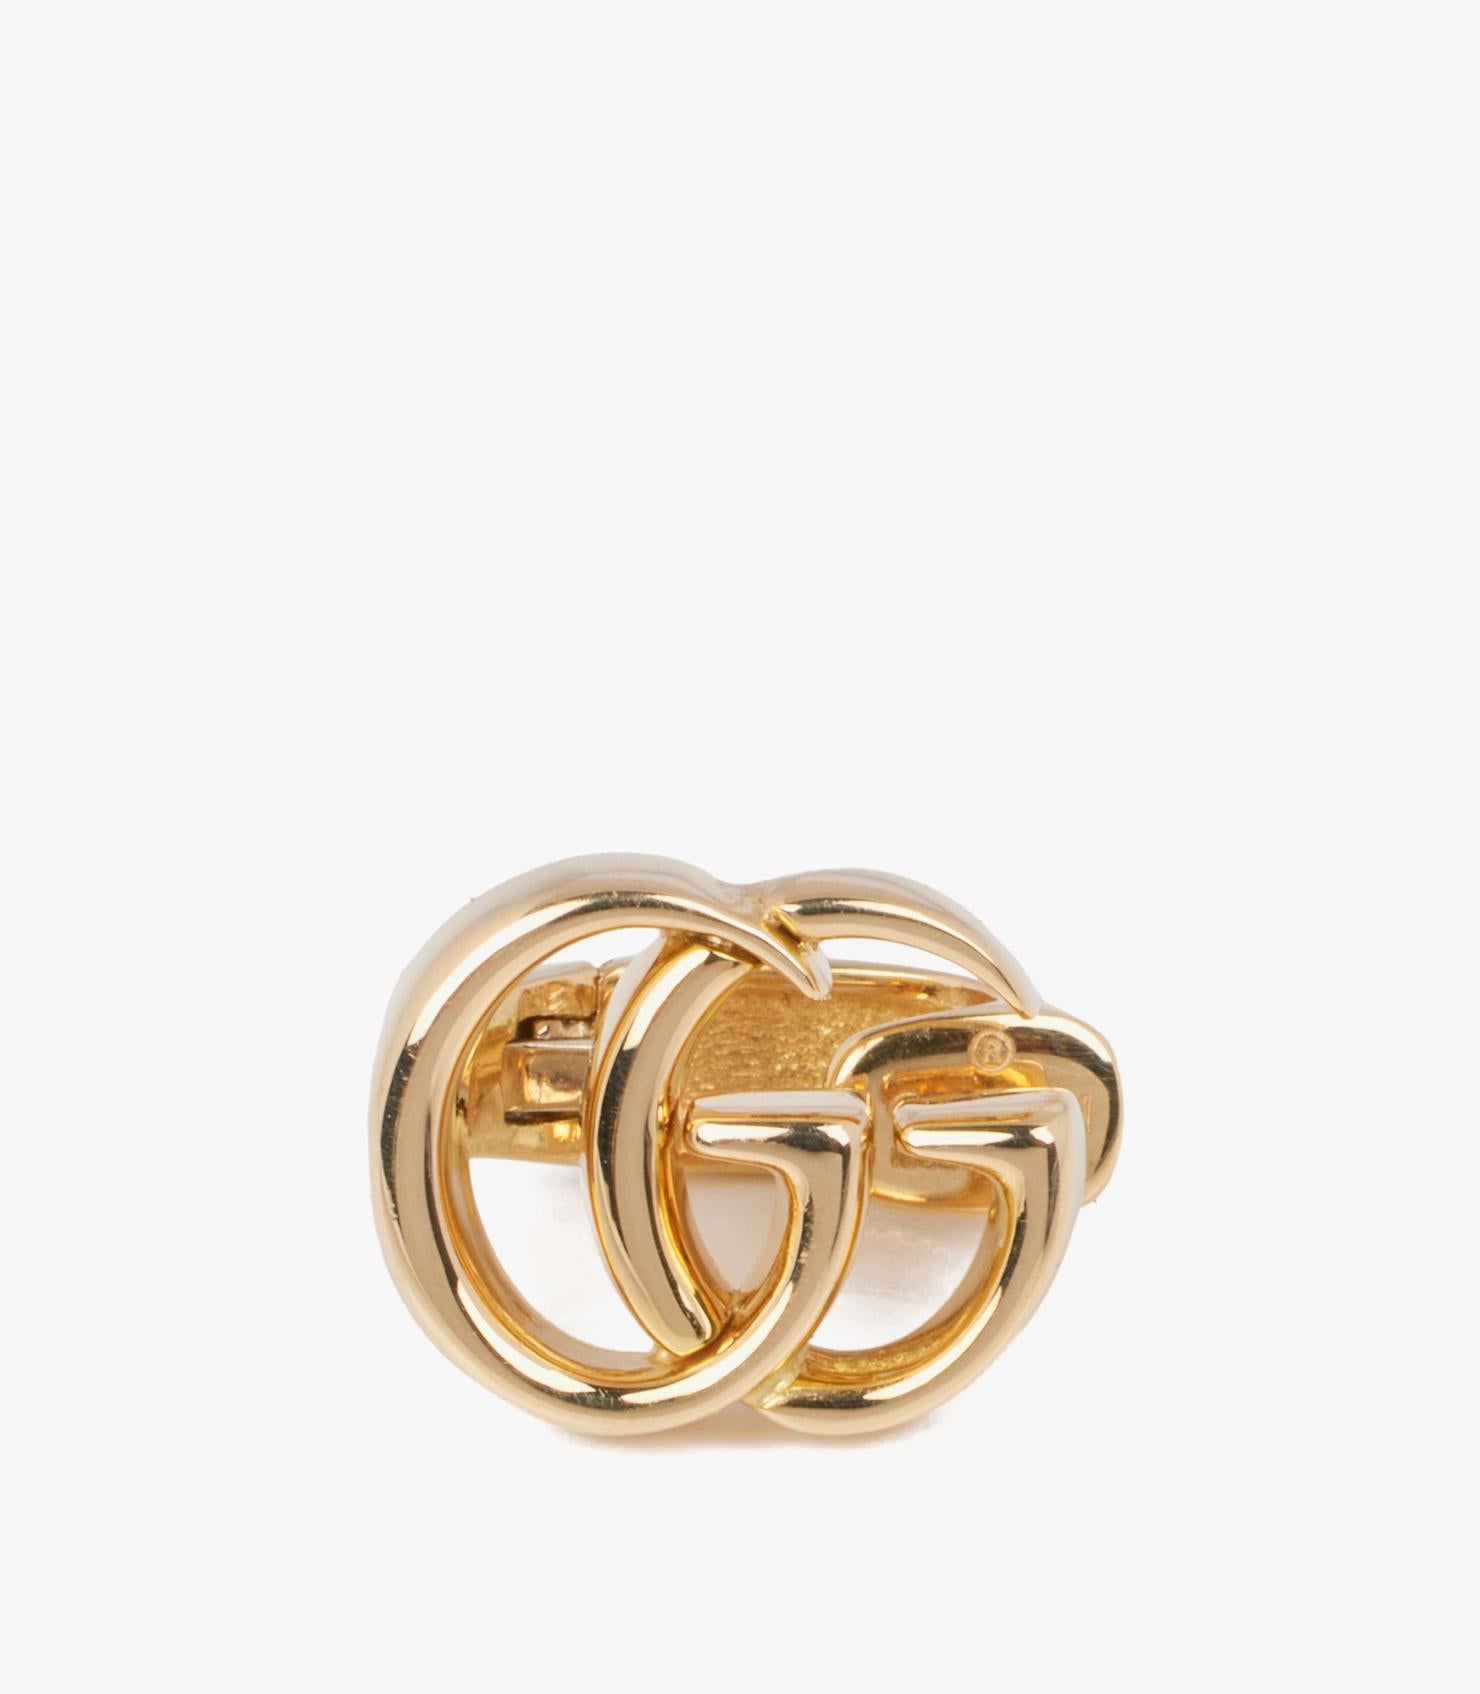 Gucci 18ct Yellow Gold Marmont Single Ear Cuff

Brand- Gucci
Model- Marmont Ear Cuff
Product Type- Earrings
Material(s)- 18ct Yellow Gold

Earring Length- 1cm
Earring Width- 12.3mm
Earring Back- Clip on
Total Weight- 3.1g

Condition Rating-